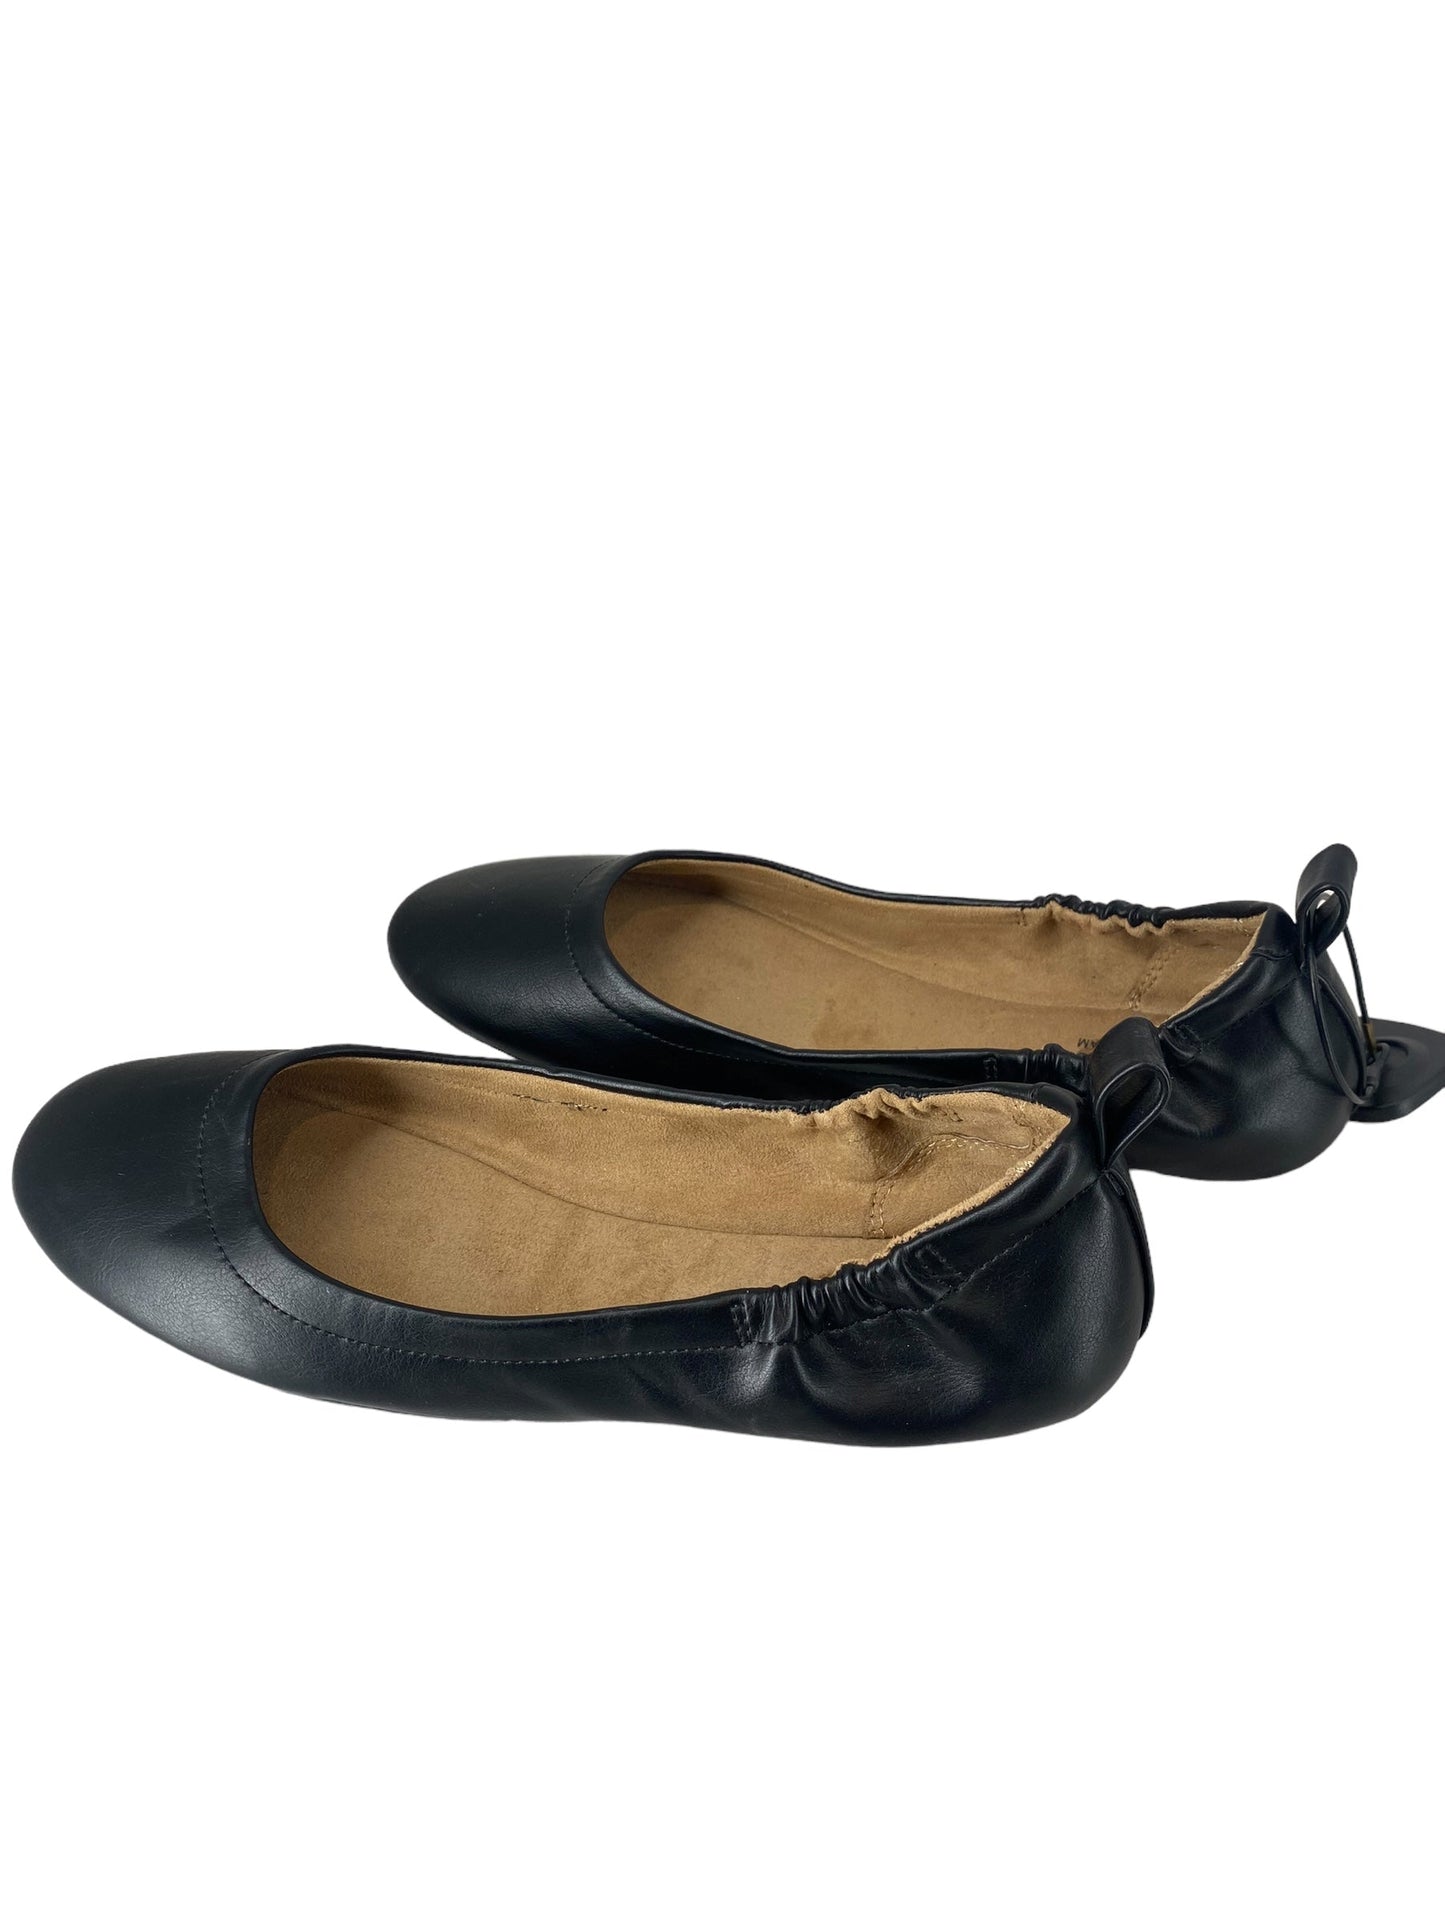 Shoes Flats By Cushionaire  Size: 8.5